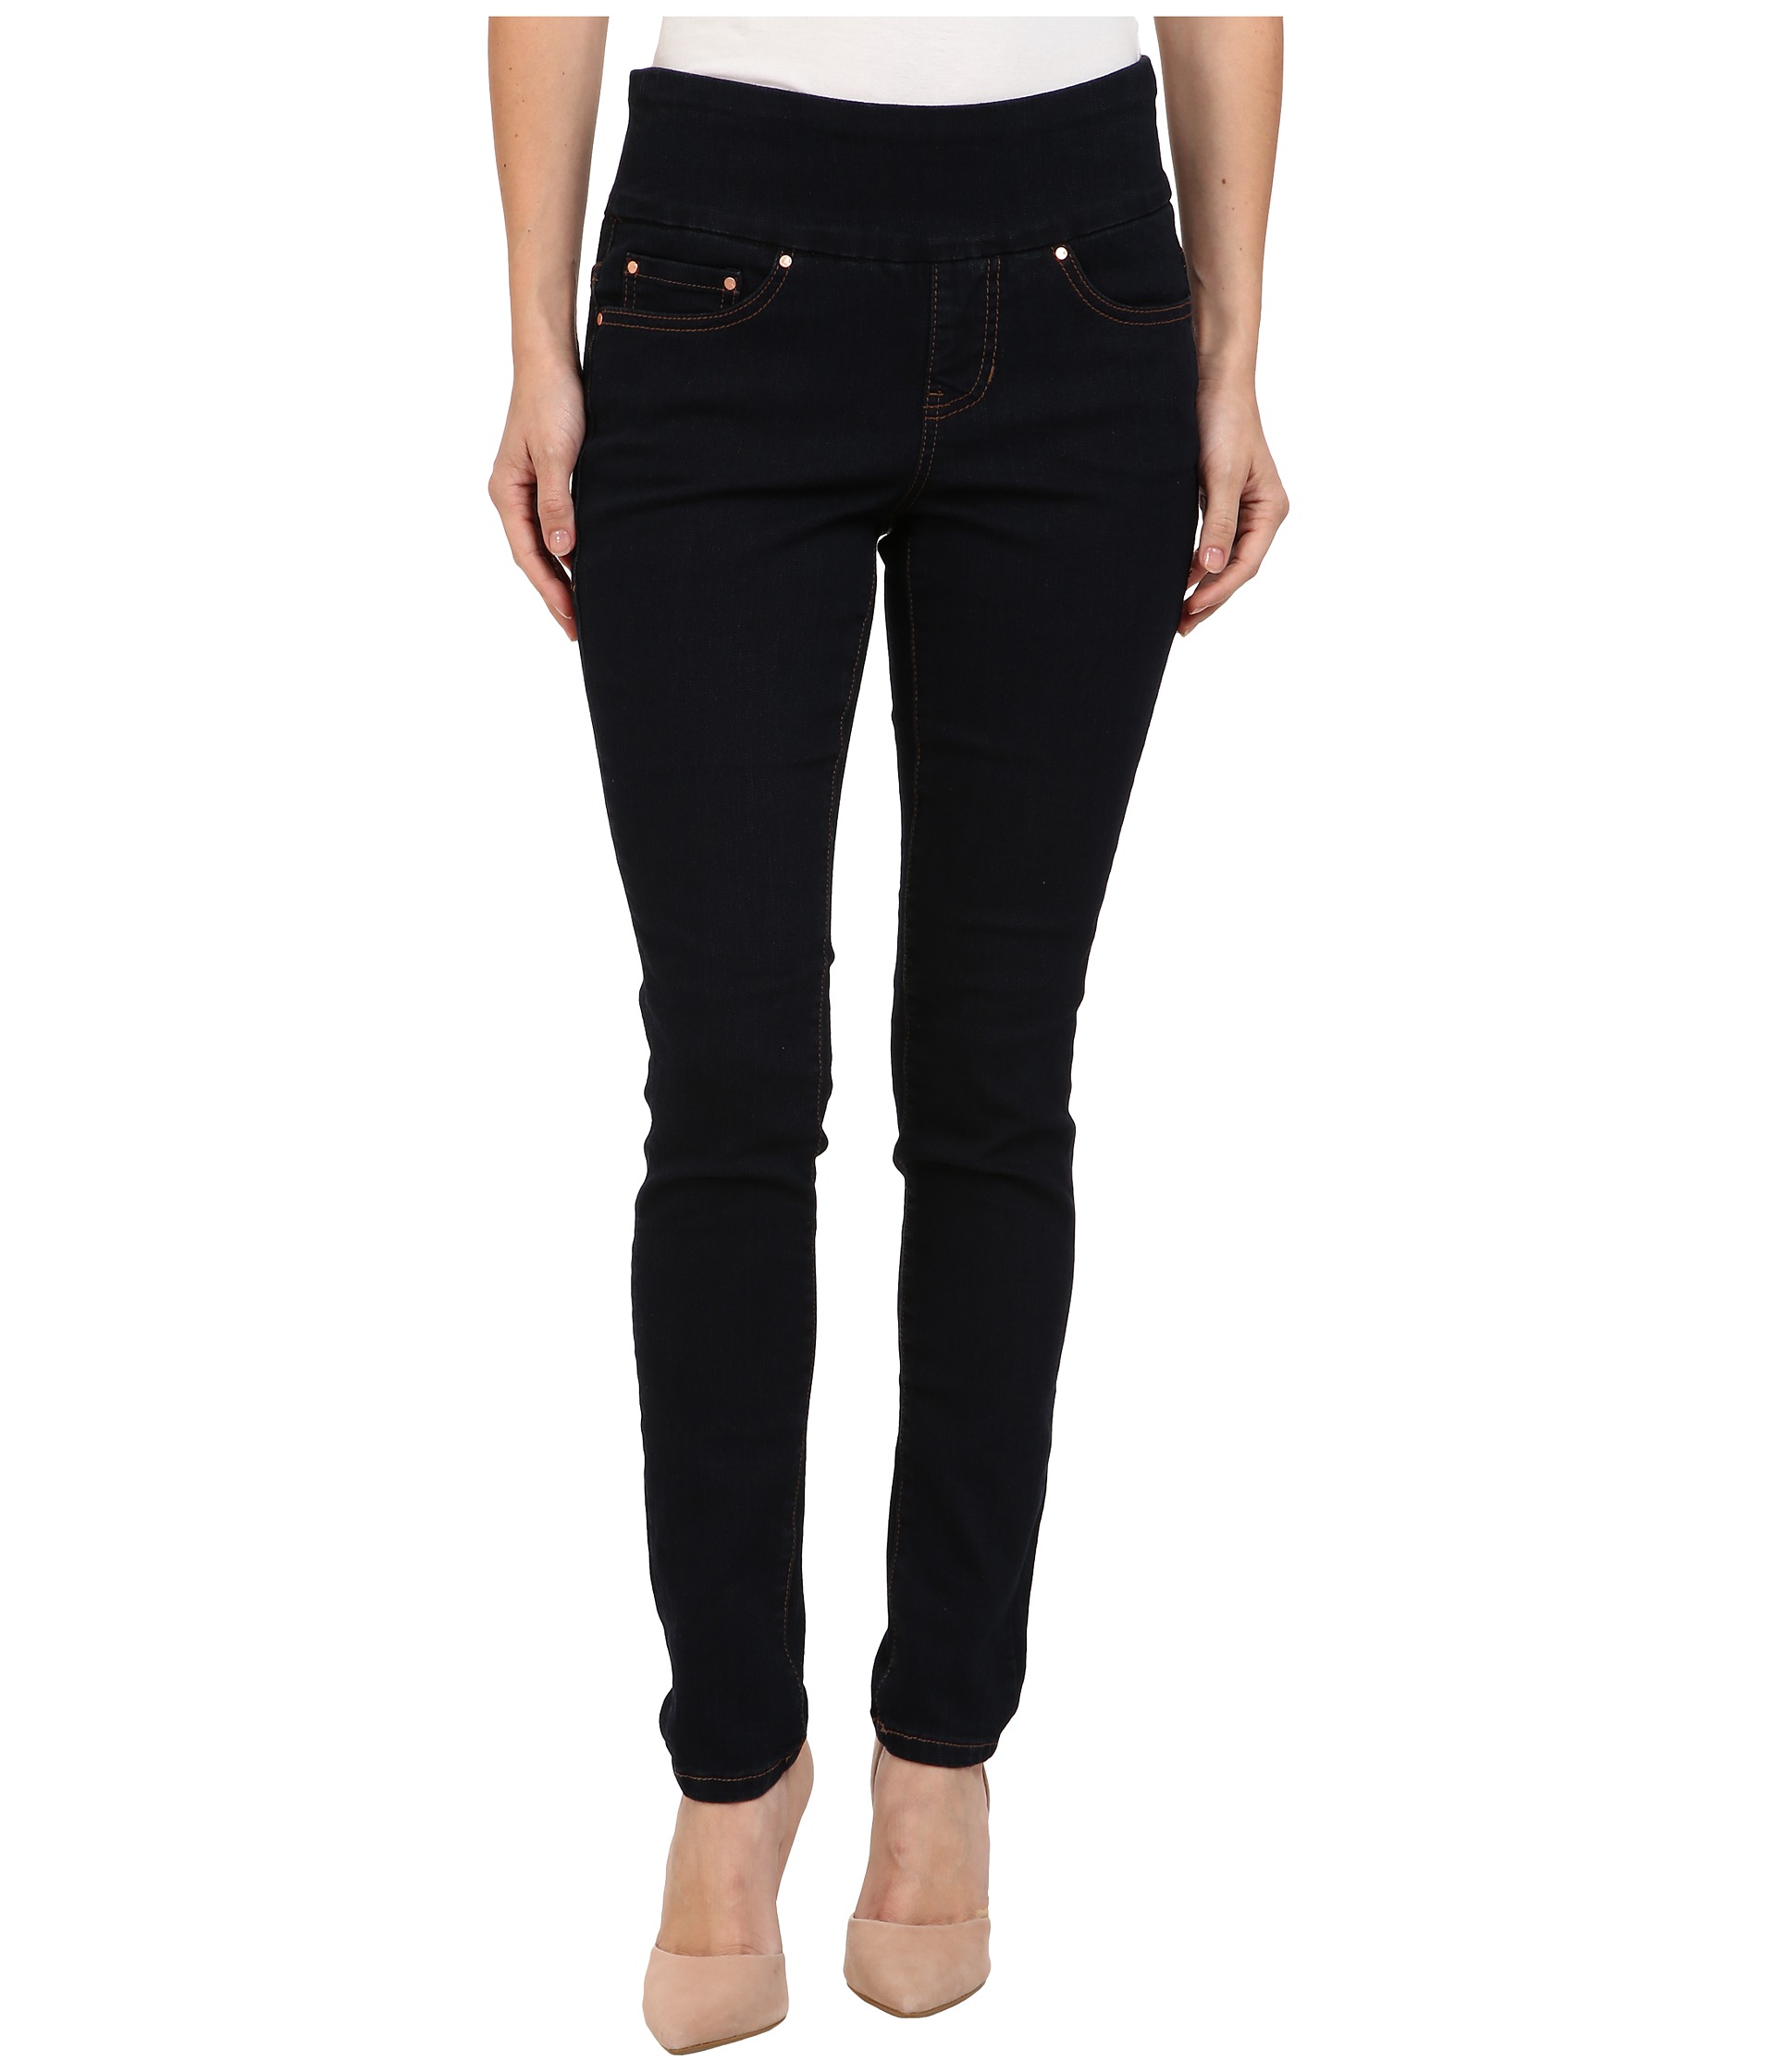 Jag Jeans Petite Petite Nora Pull-On Skinny in After Midnight at Zappos.com